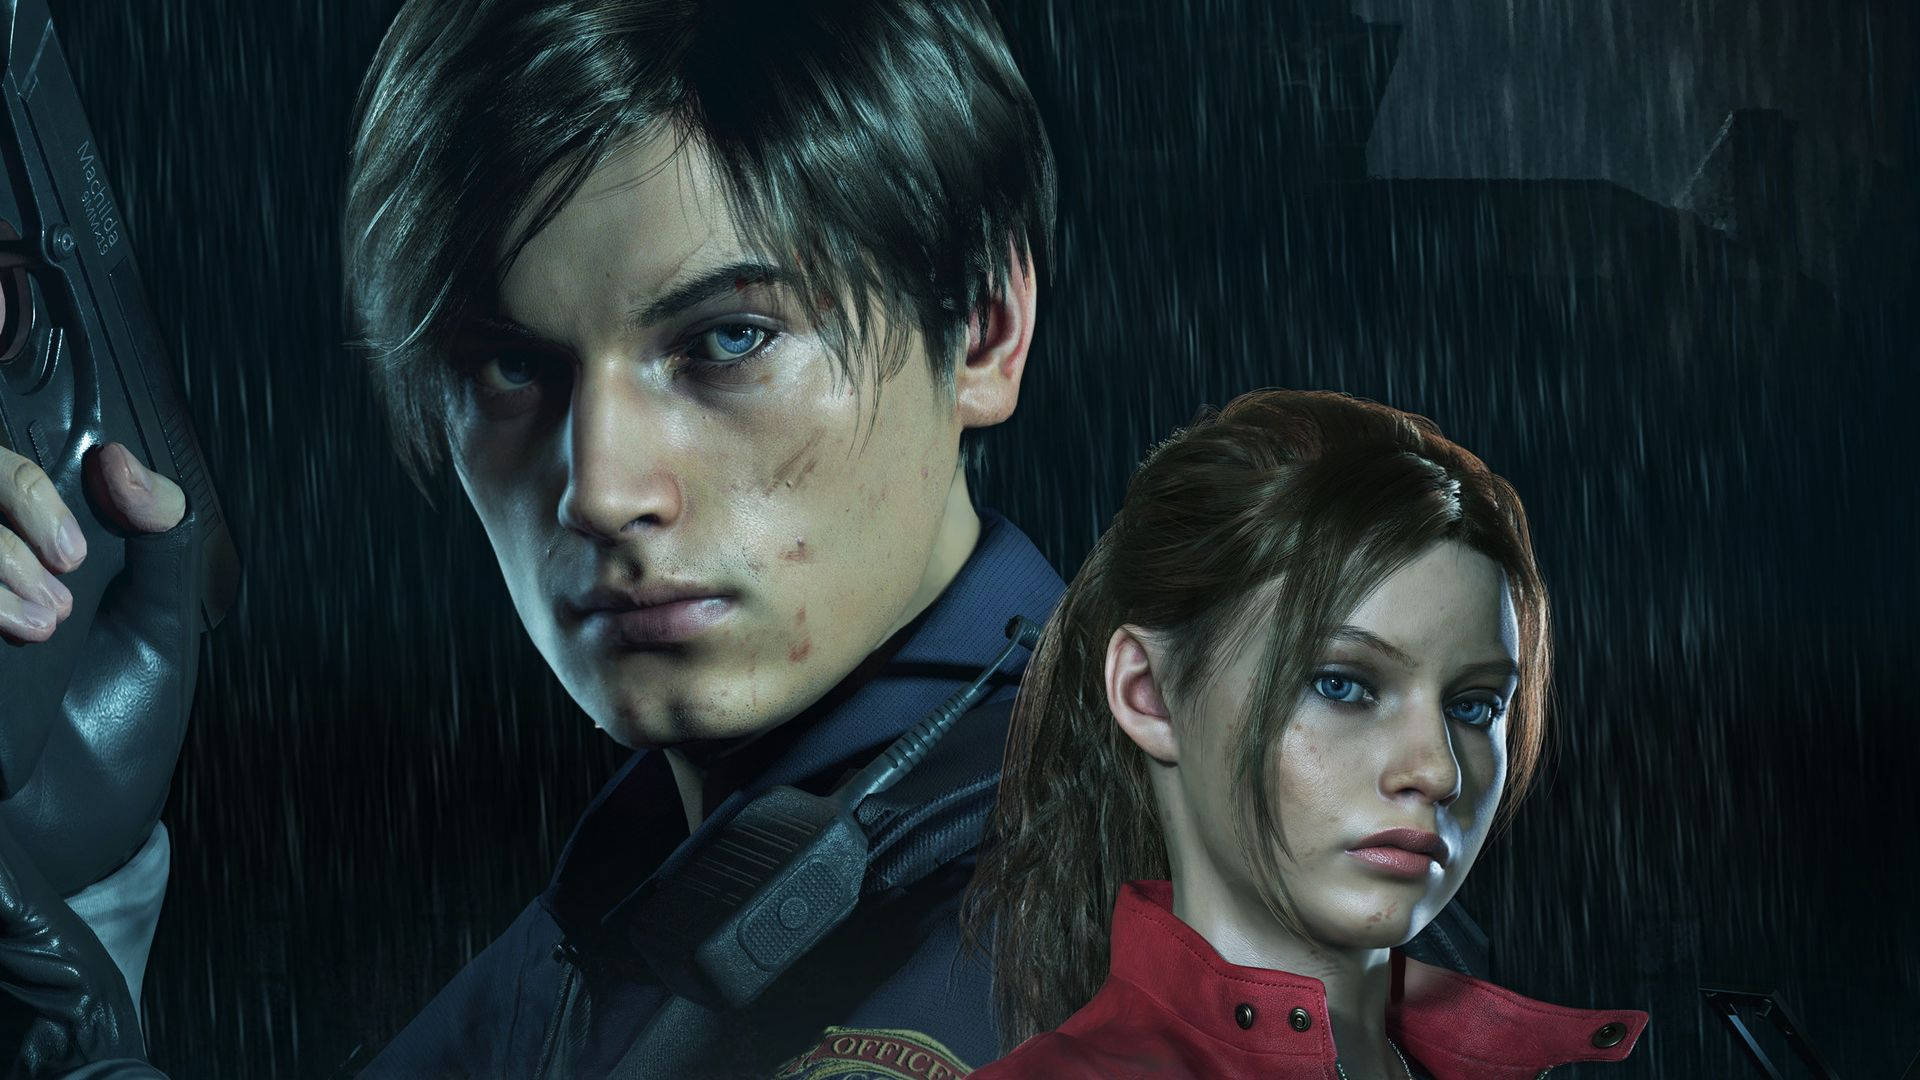 Leon and Claire team up to survive the horror of Raccoon City in Resident Evil 2 Wallpaper